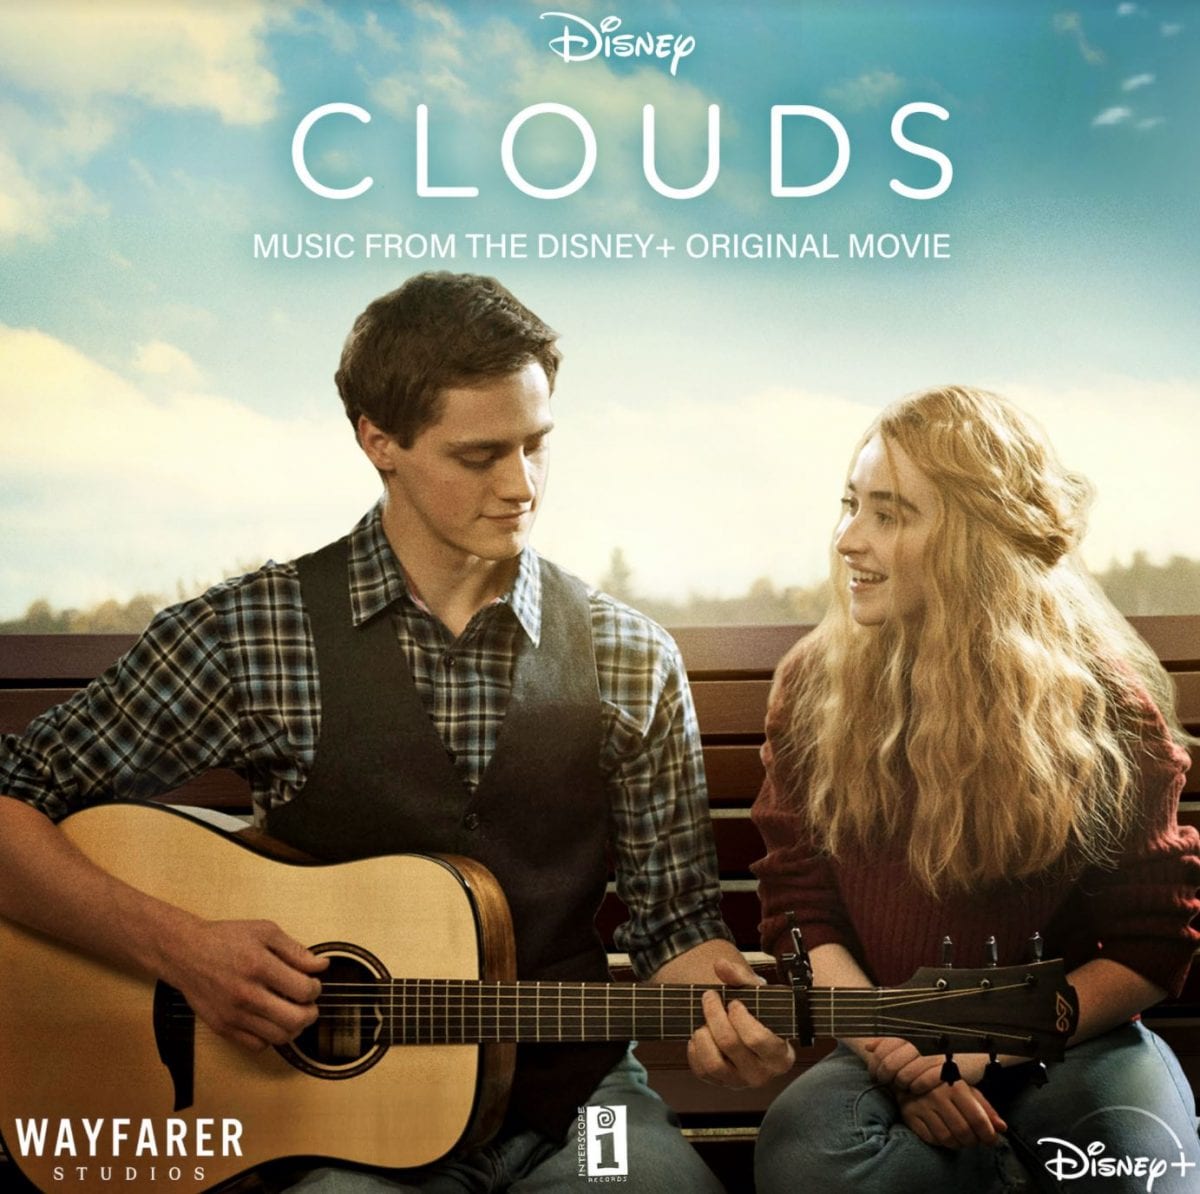 New Track 'Clouds' From Soundtrack For Disney+ Original Movie Released Today. Movies. Games. Geek Culture